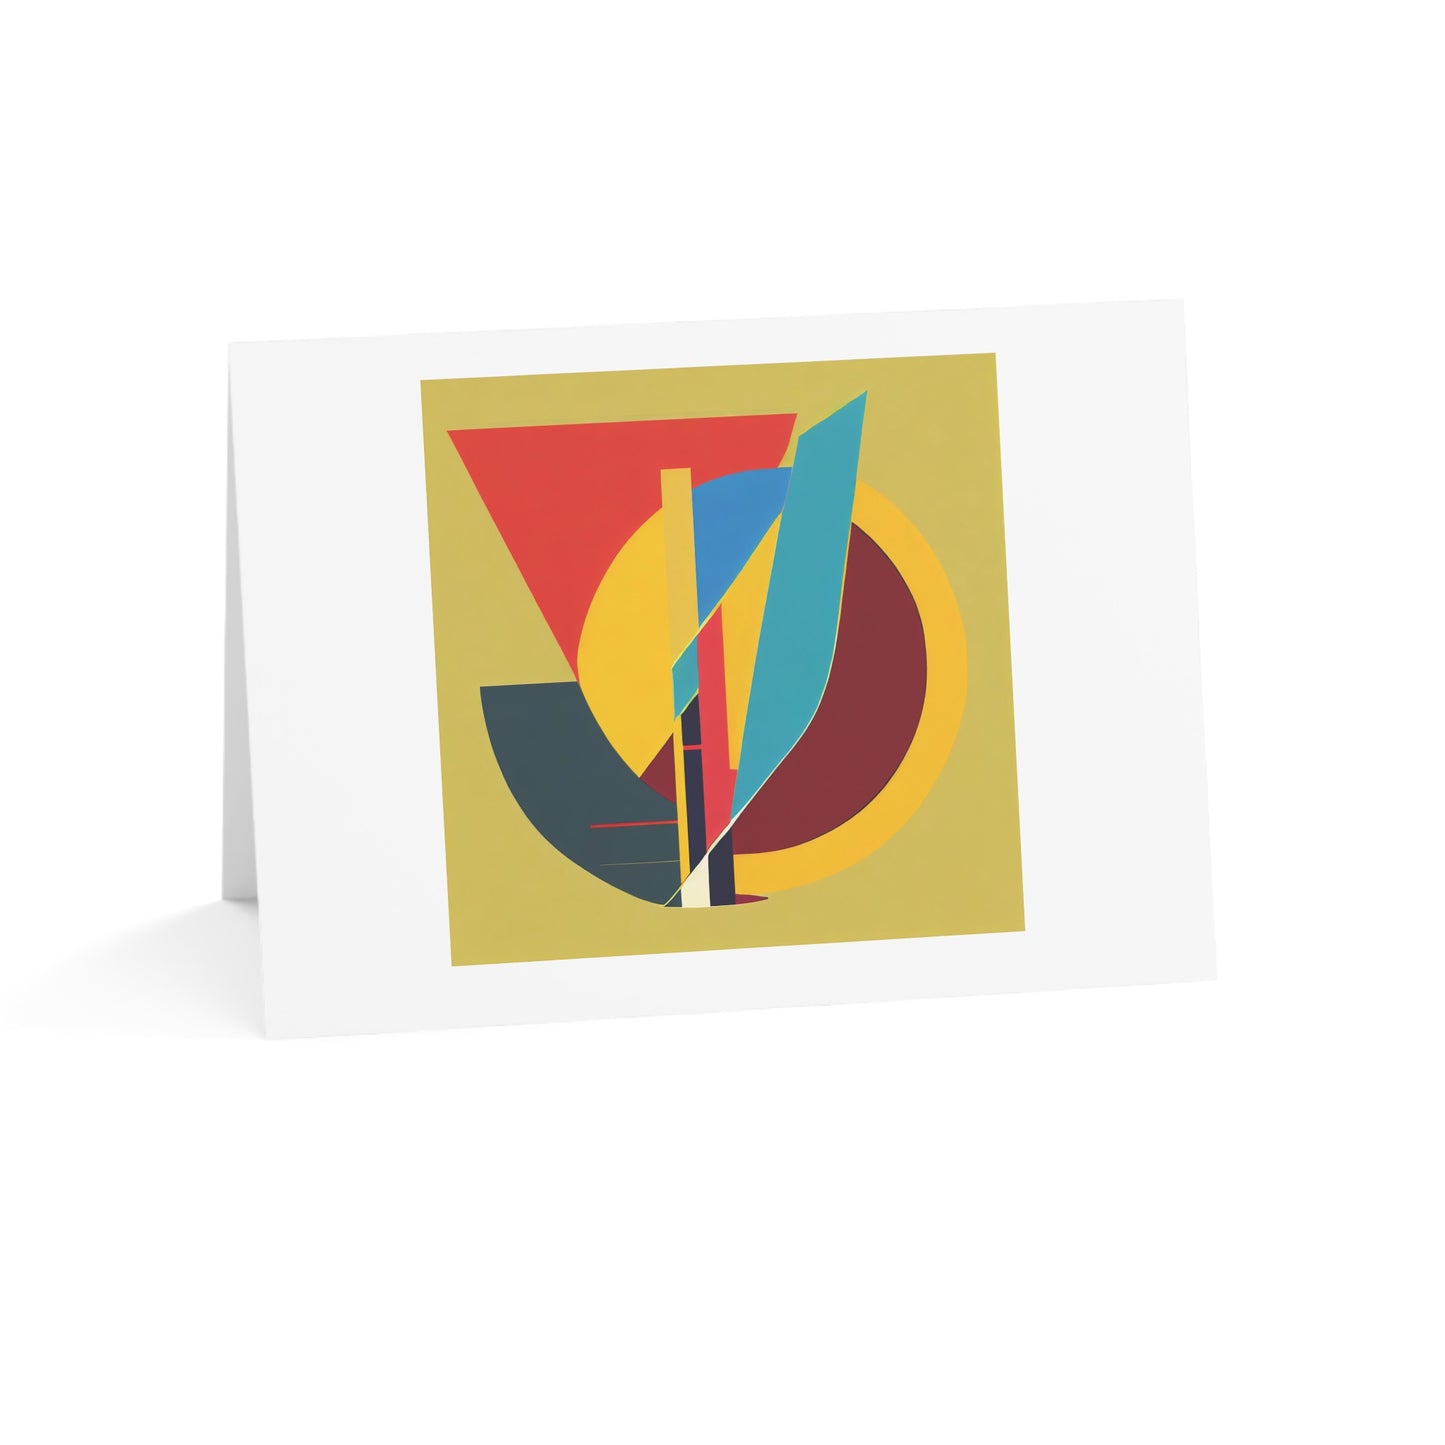 POP DECO ONE - Greeting Cards (1, 10, 30, and 50pcs)